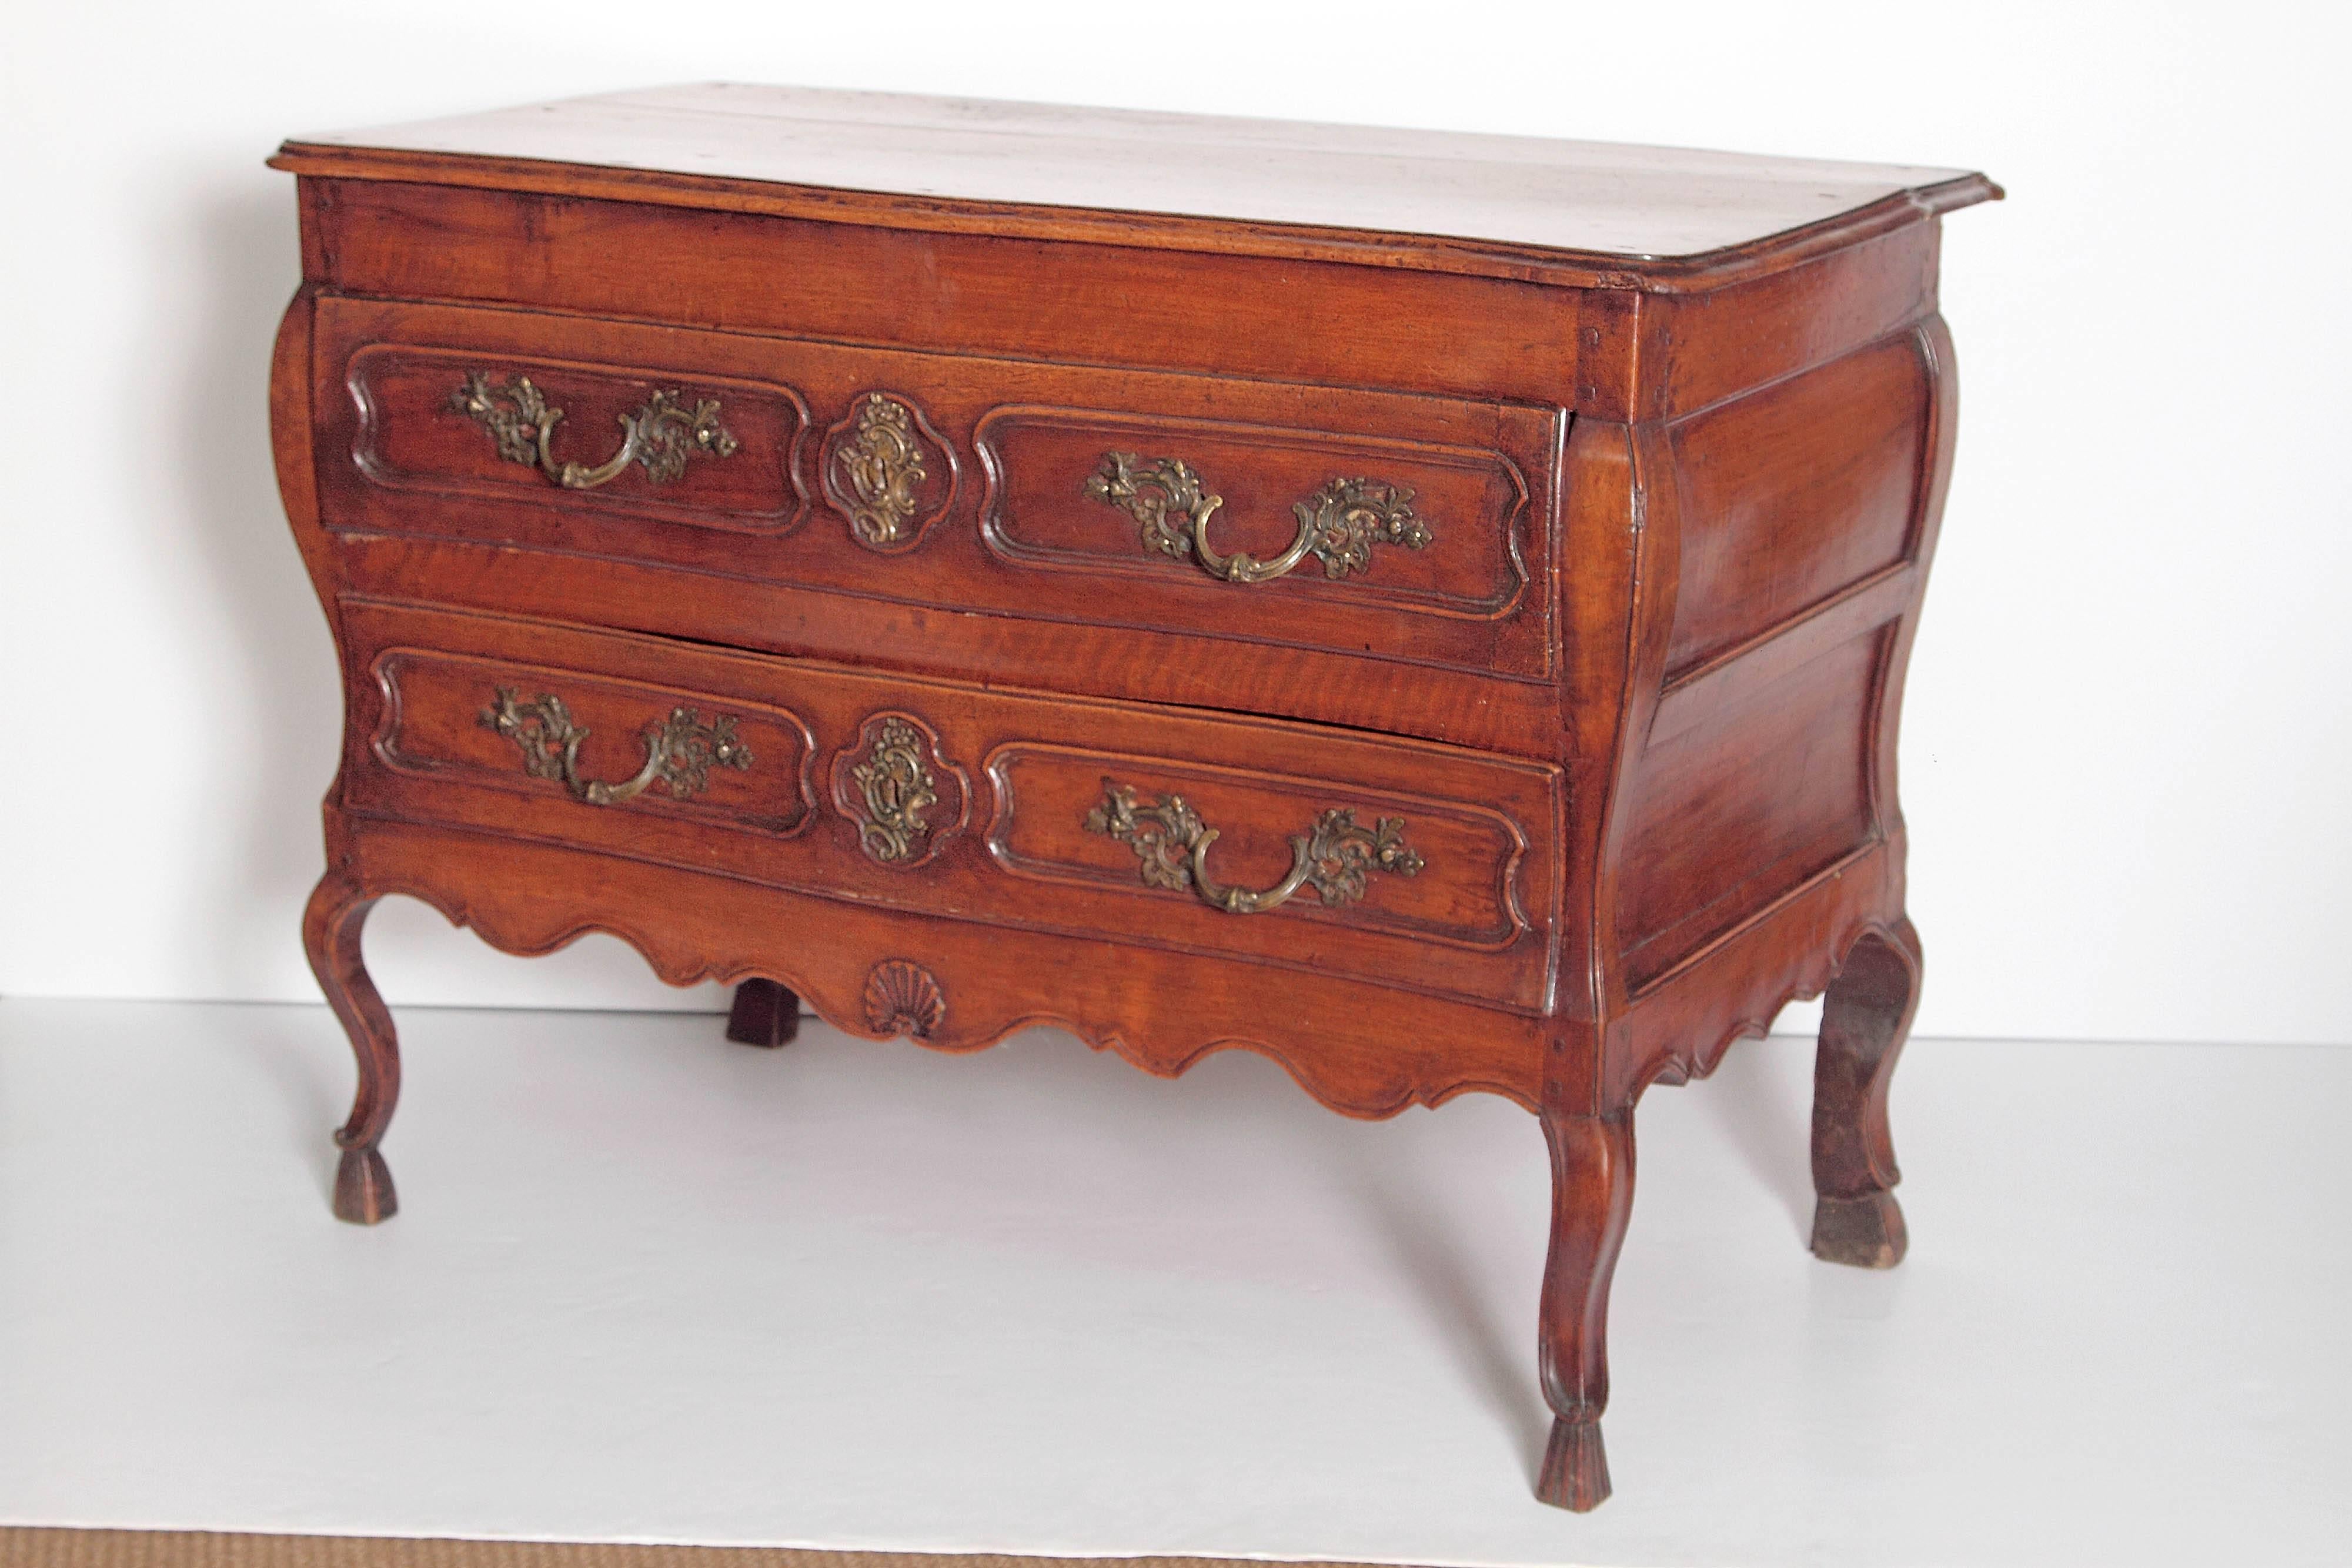 A Louis XV period two-drawer chest of walnut. Panels on drawers and casual curving apron. Stands on cabriole legs with hoof feet. Ornate drawer pulls and escutcheons.